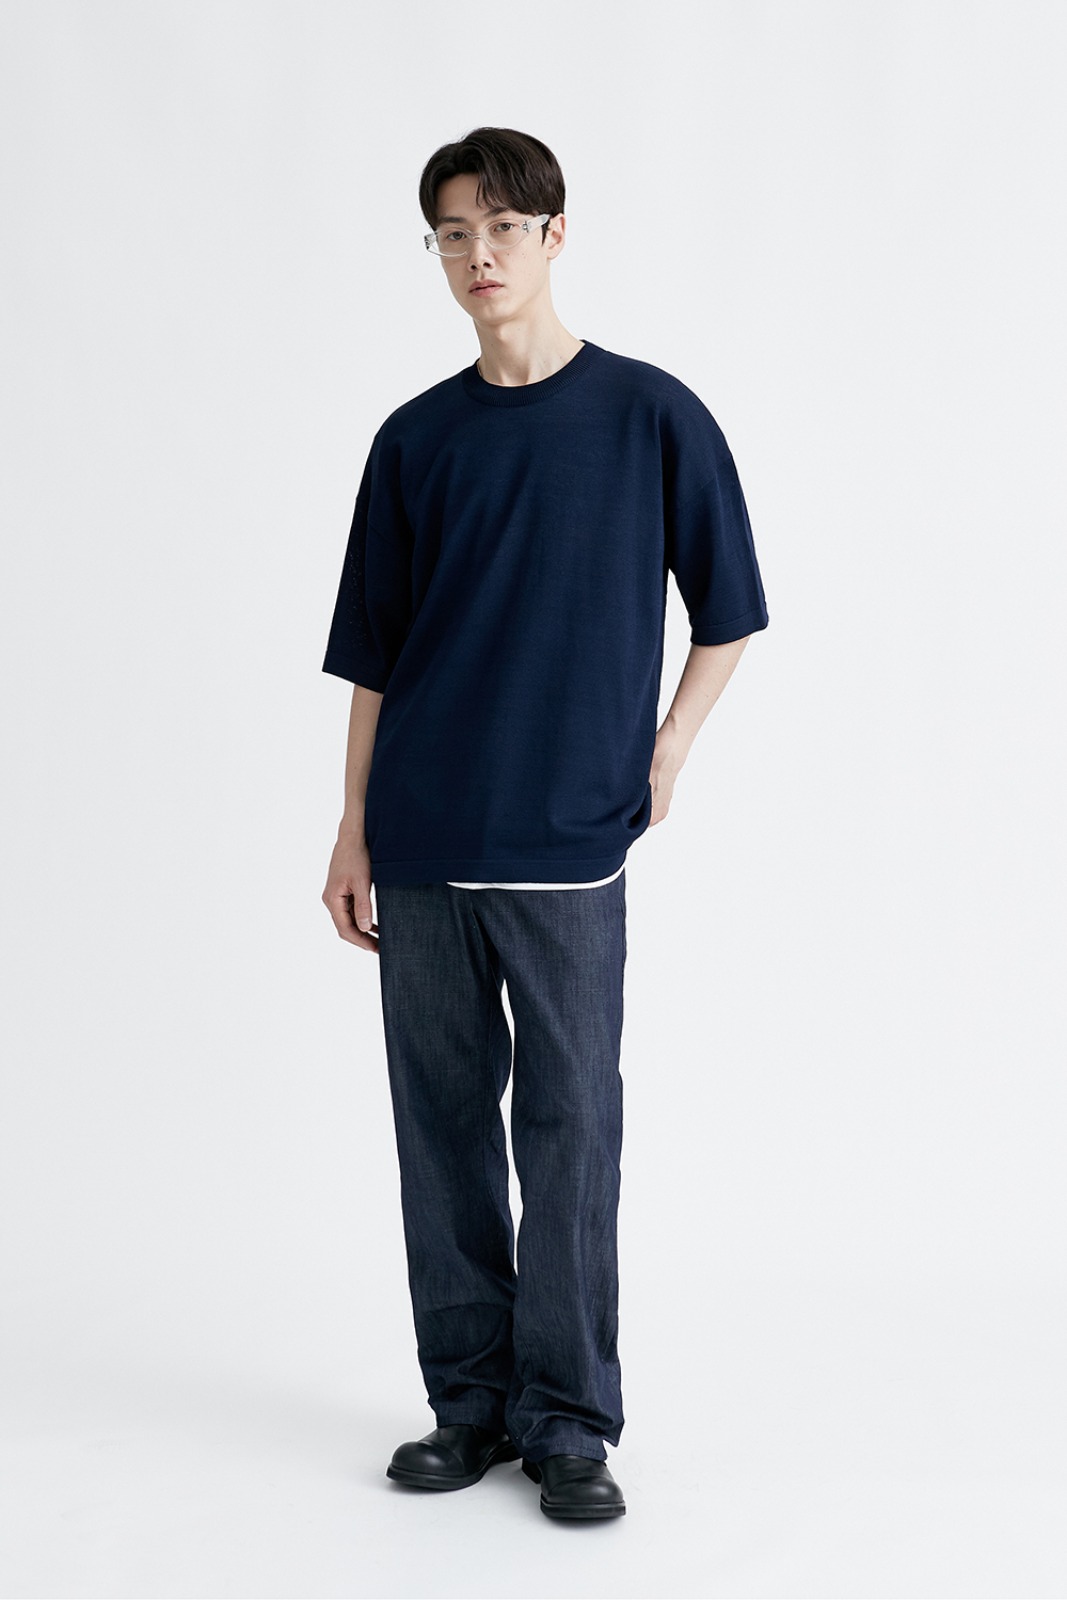 2022 S/S COLLECTION#2 LOOKBOOK